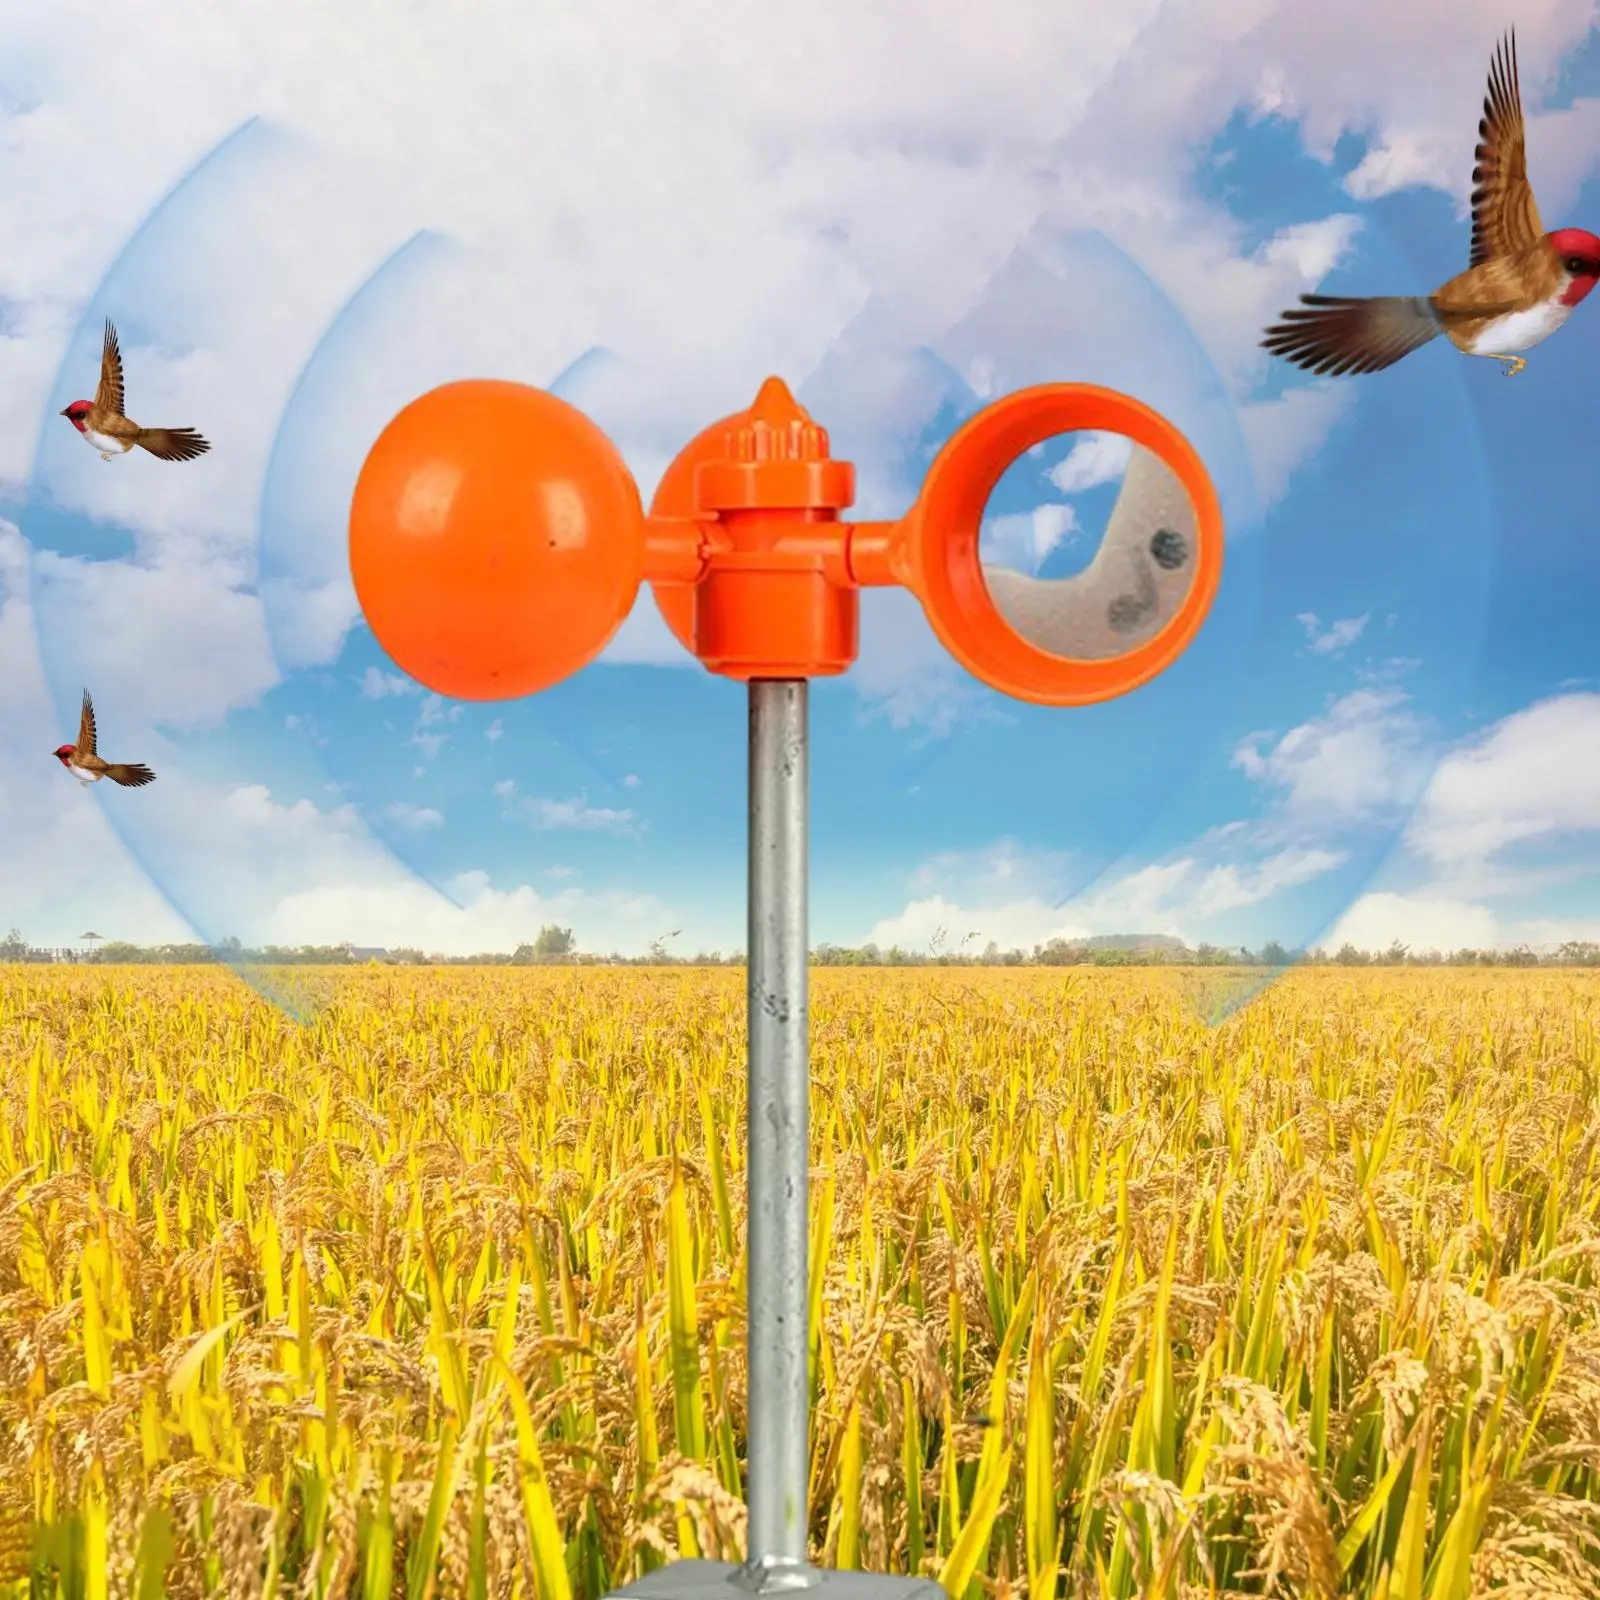 Bird Repeller Supplies Tool Bird Scarer for Farming Orchard Lawn Ponds Protection